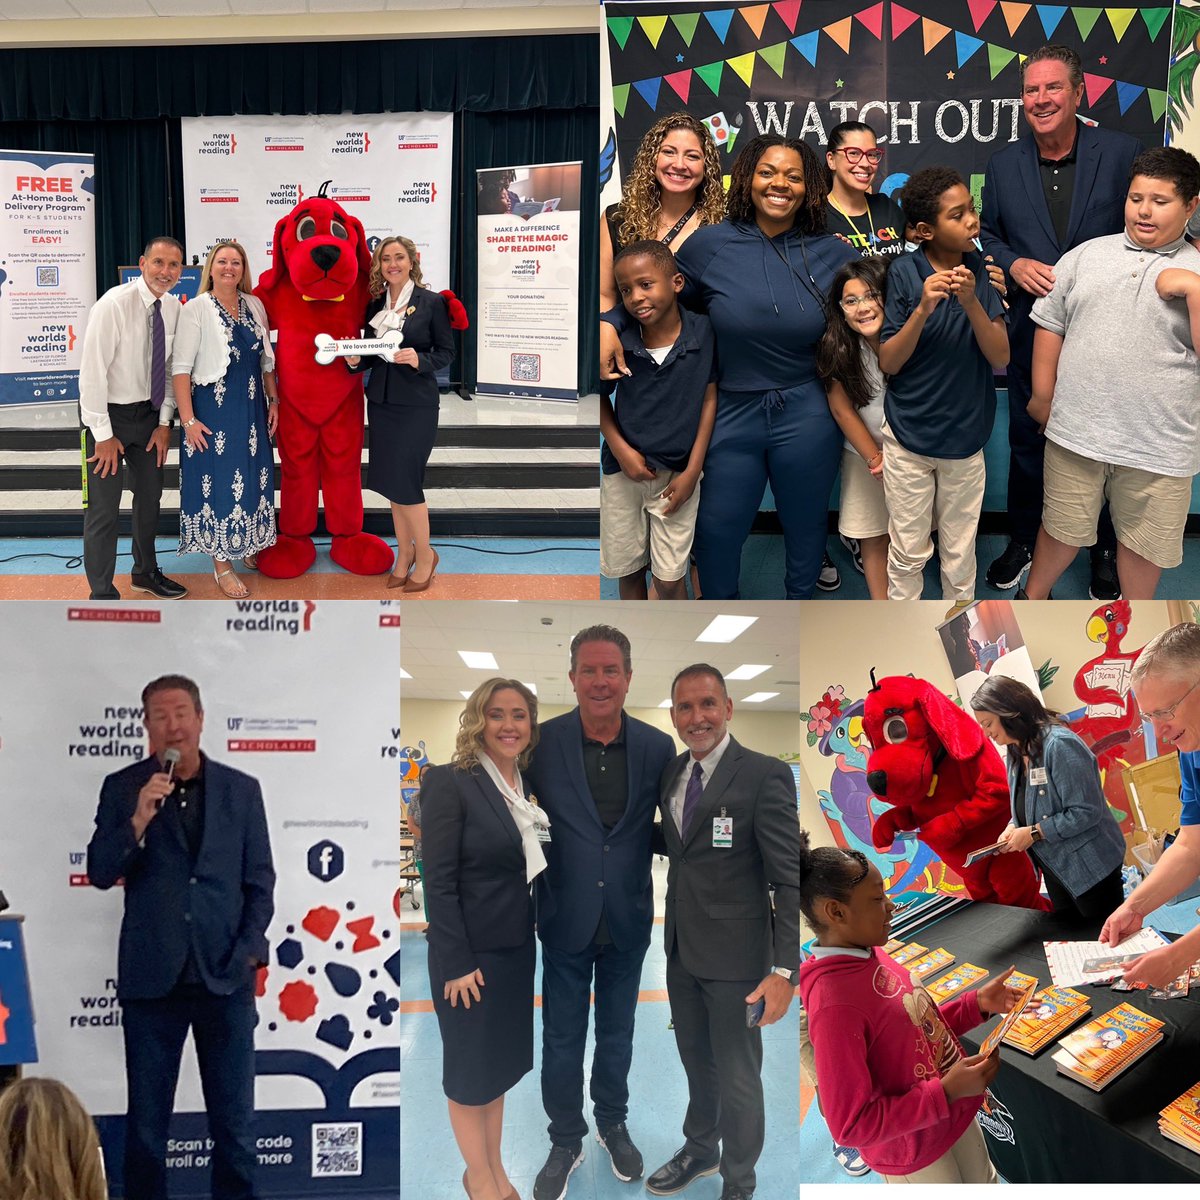 Dan Marino, UF Lastinger Center's New World of Reading, and Universal
Property & Casualty Insurance Company come together at CPE to inspire scholars and share their vision of ensuring each child has the opportunity to experience new worlds and achieve their fullest potential.